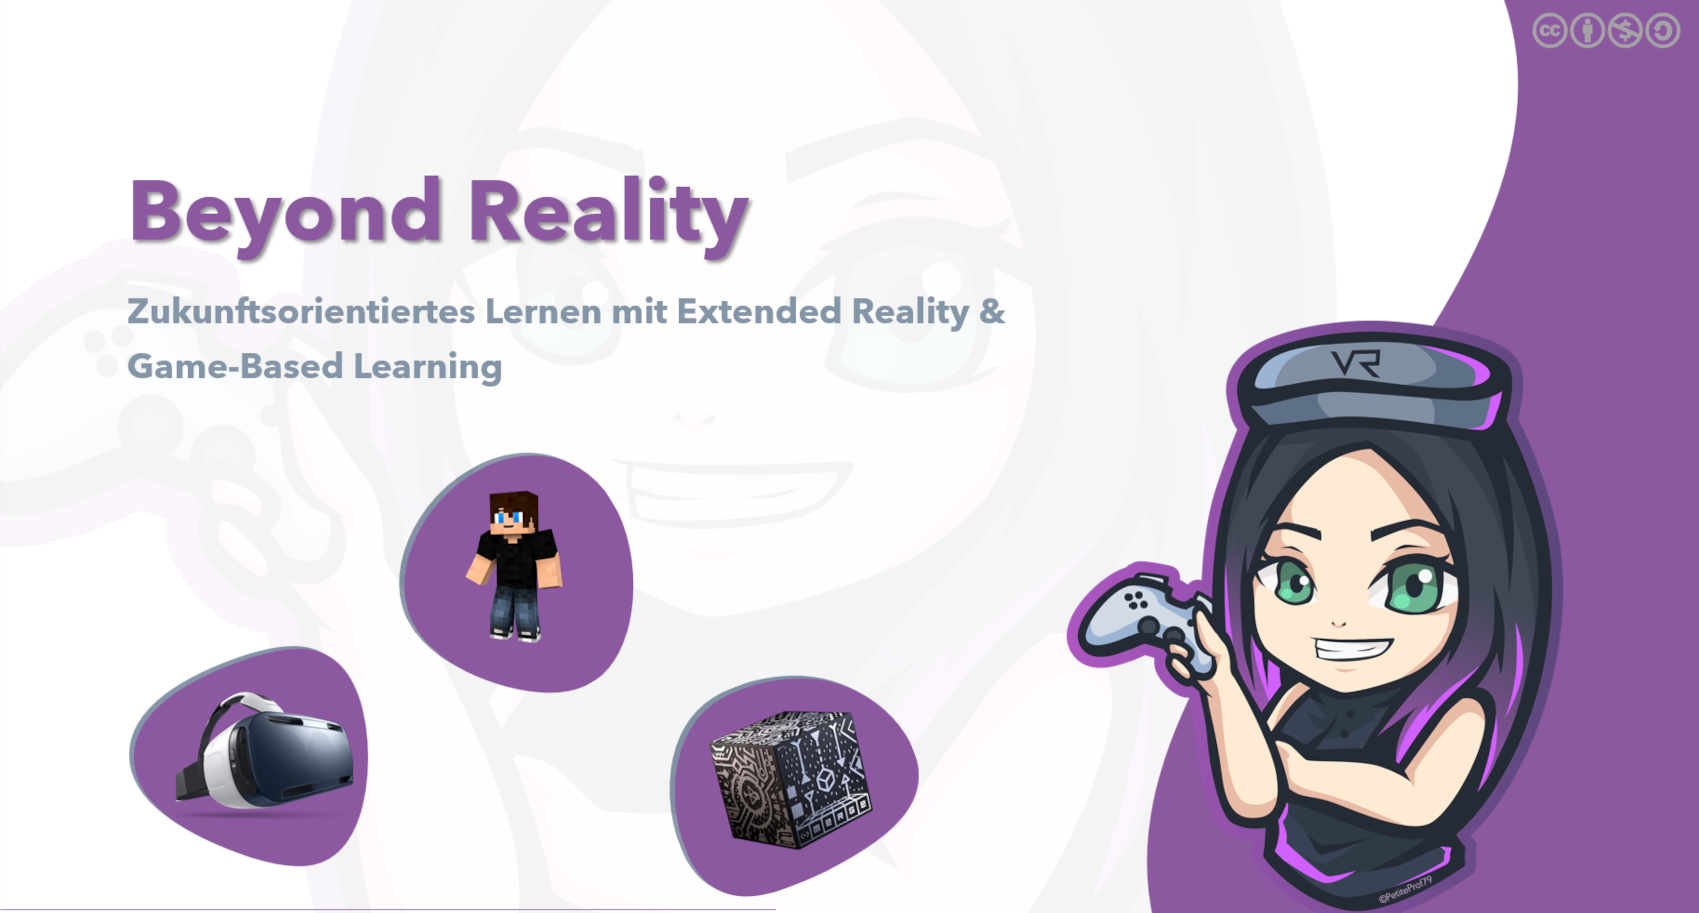 Beyond Reality: Zukunftsorientiertes Lernen mit Extended Reality & Game-Based Learning